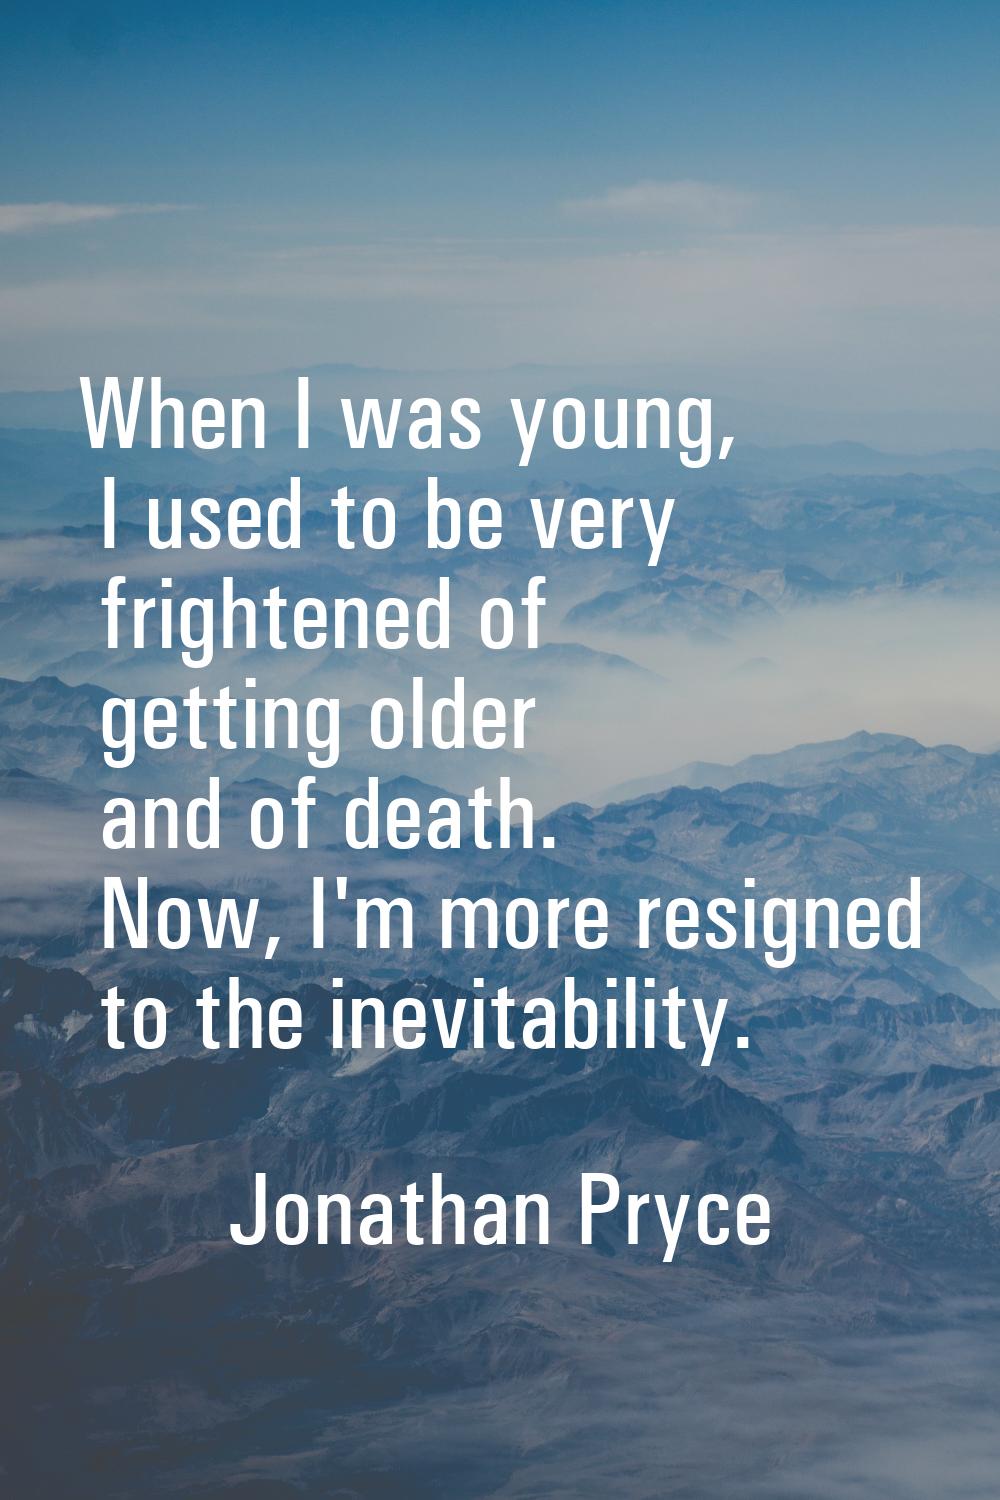 When I was young, I used to be very frightened of getting older and of death. Now, I'm more resigne